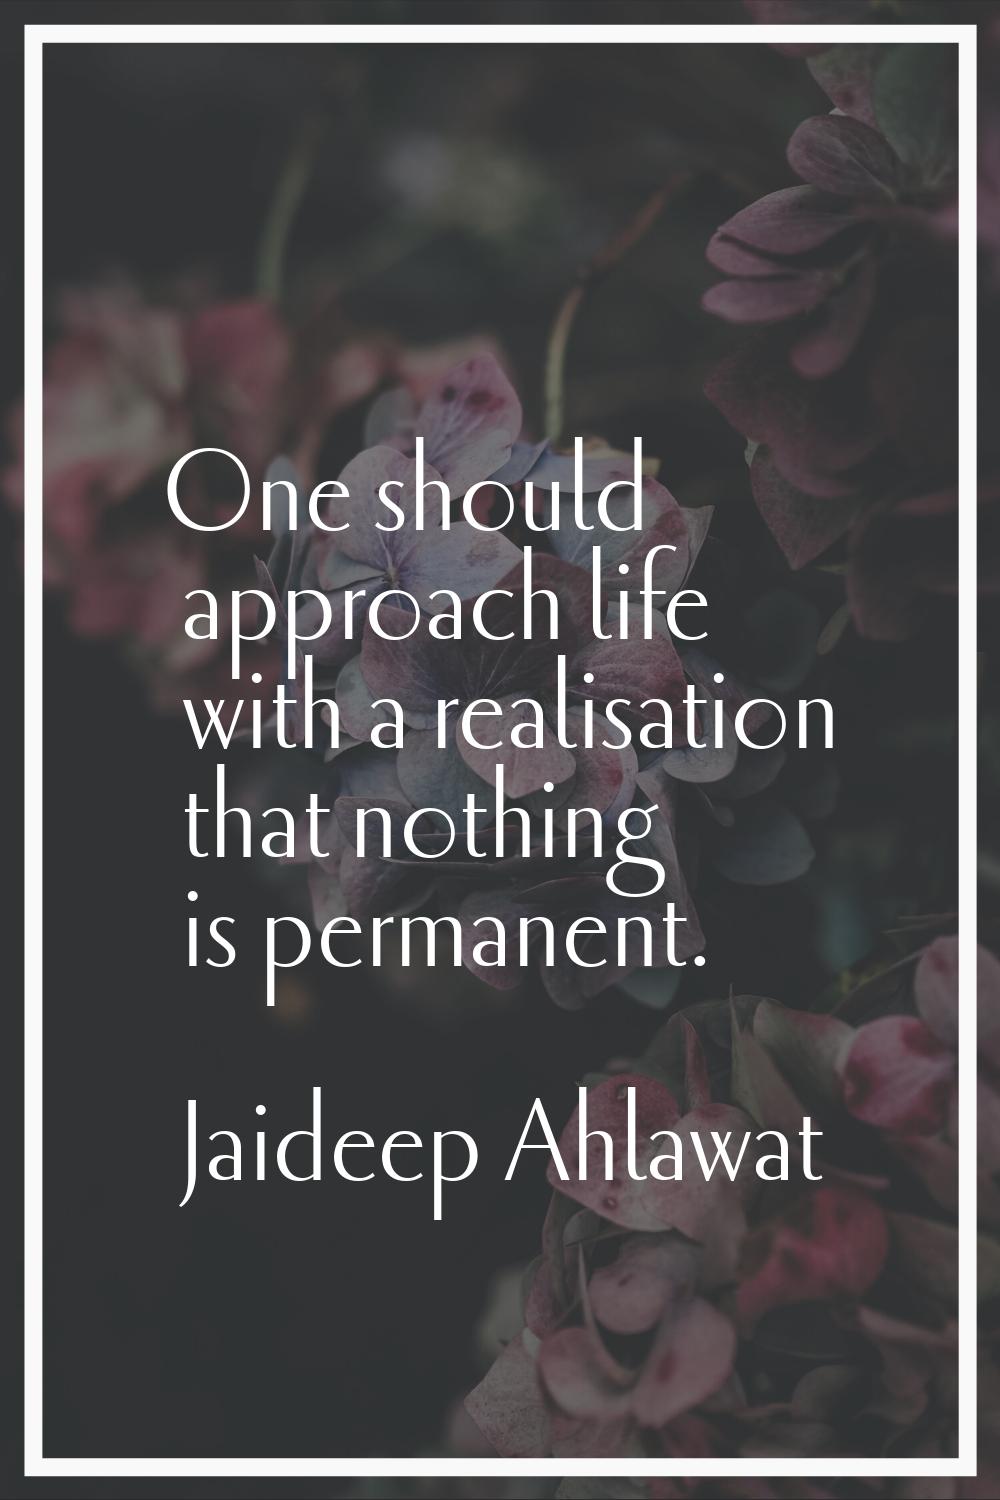 One should approach life with a realisation that nothing is permanent.